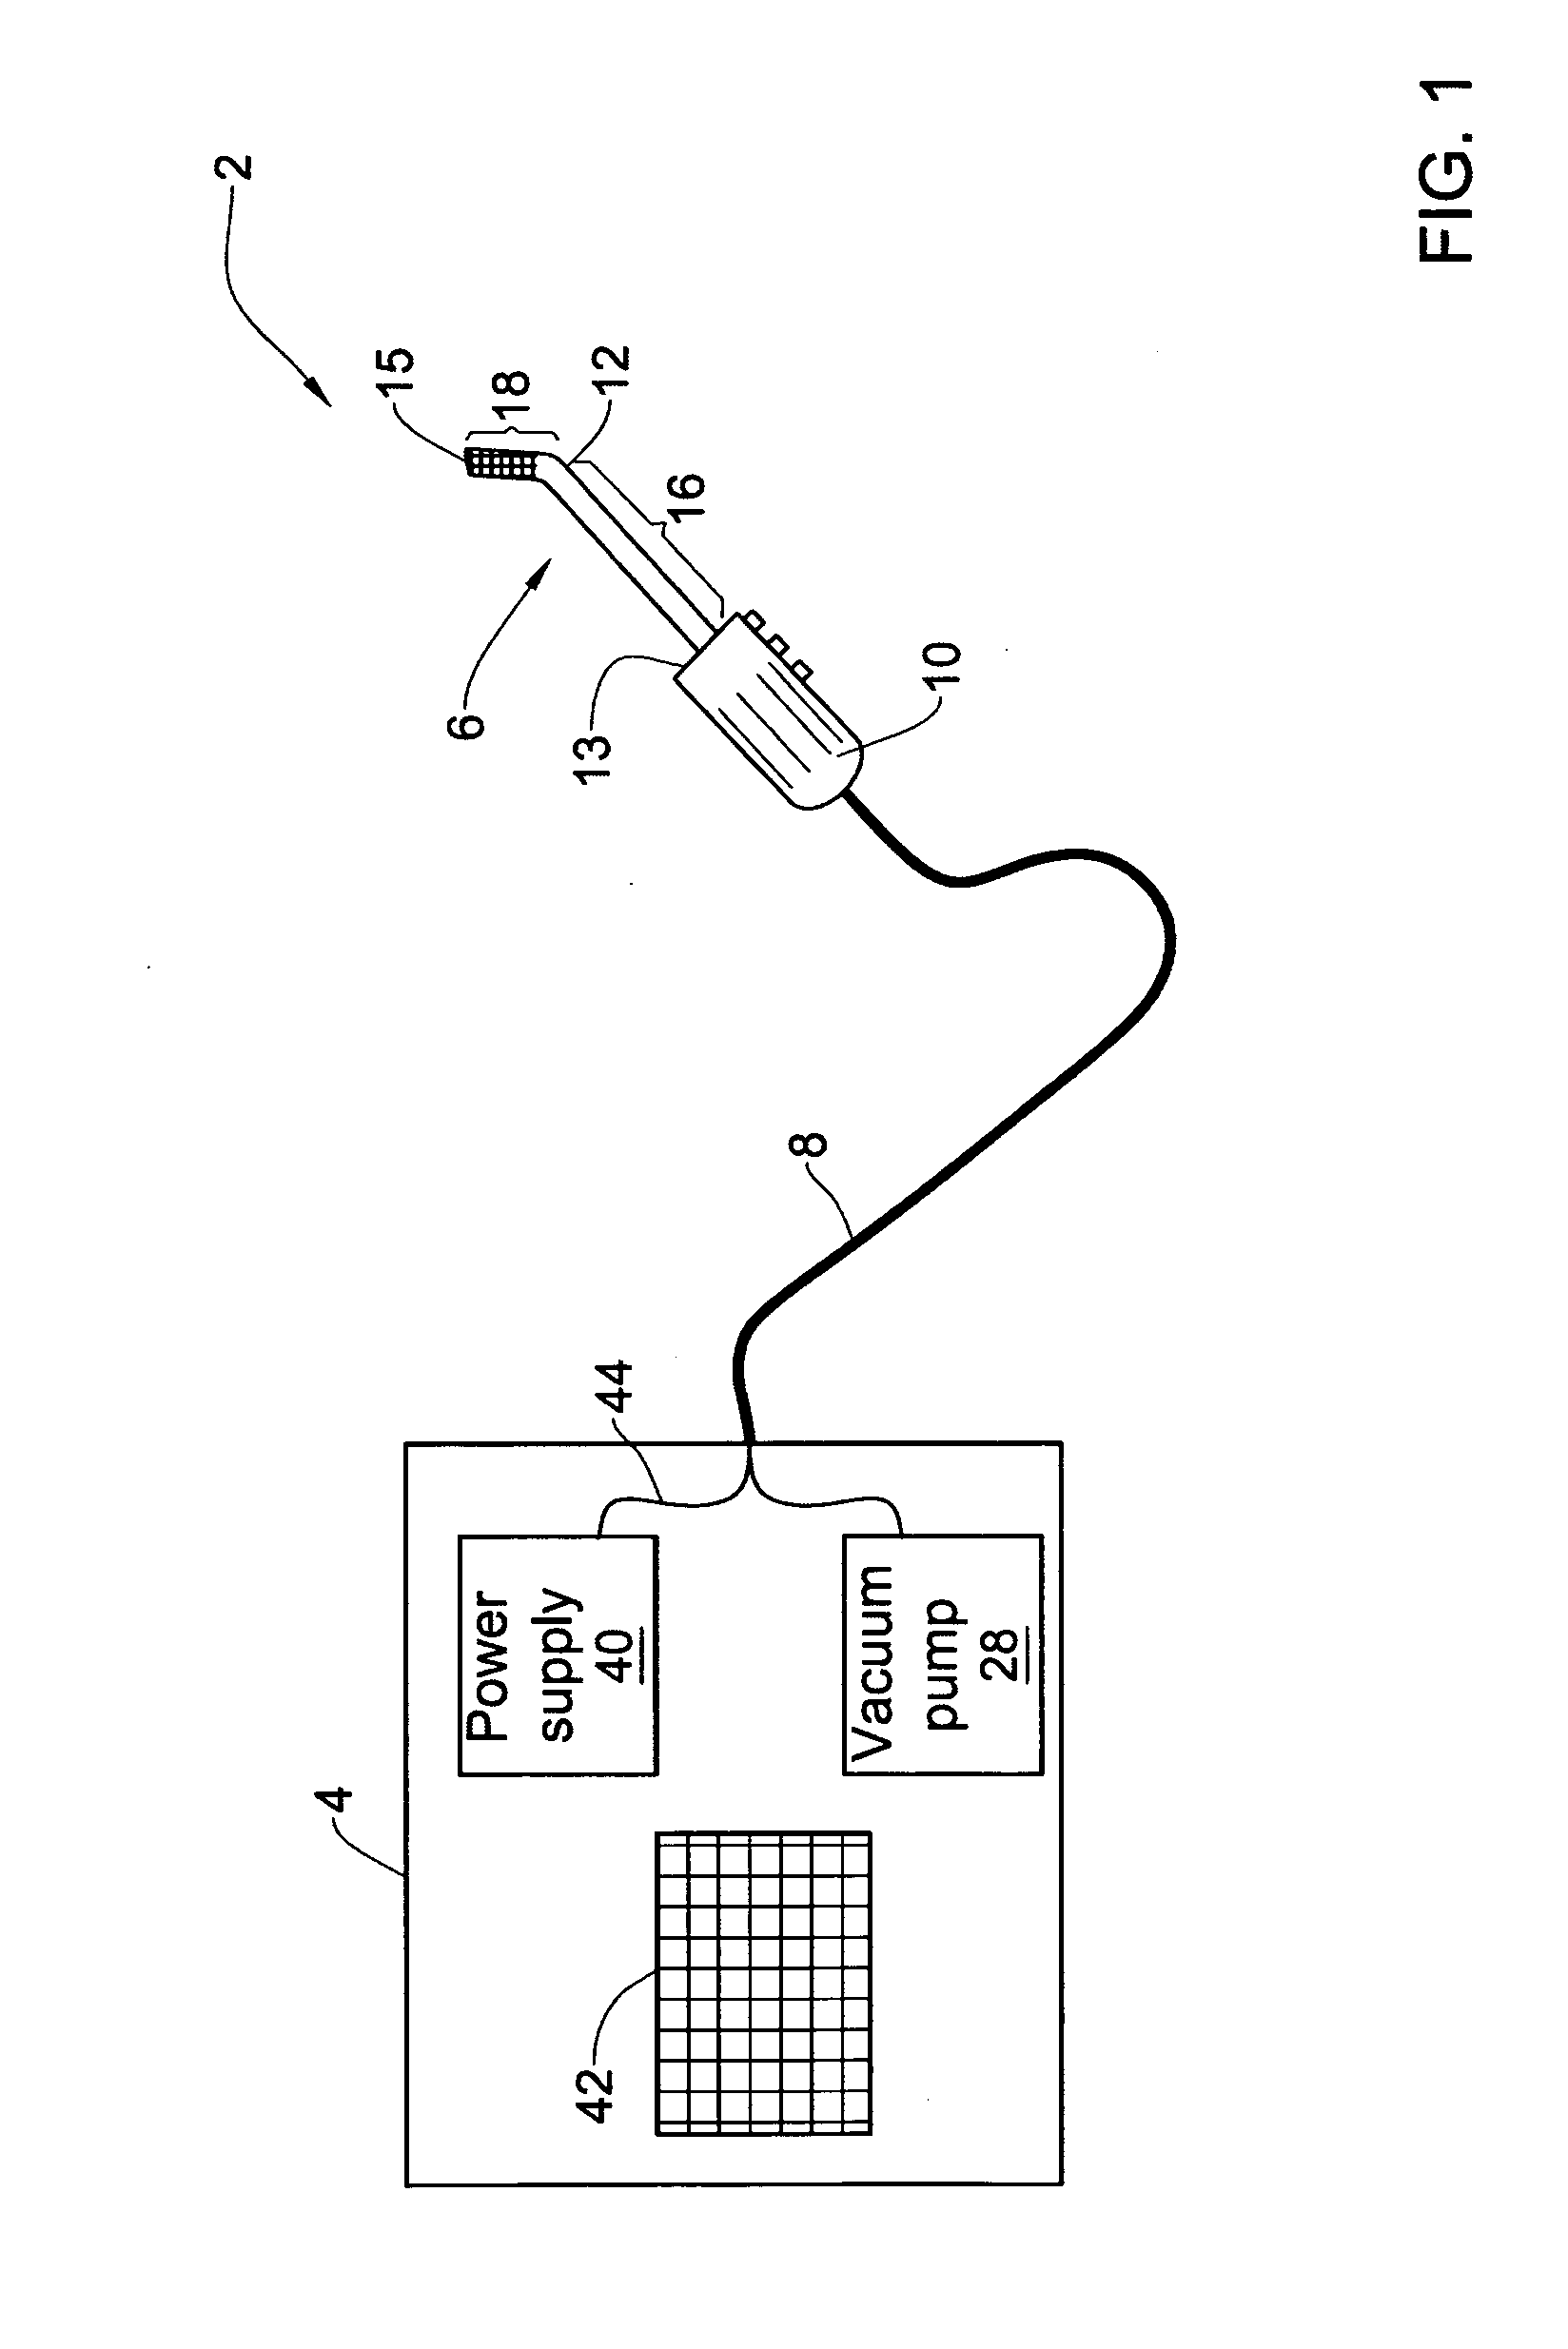 Pharmaceutical composition and system for permeabilizing fetal membranes